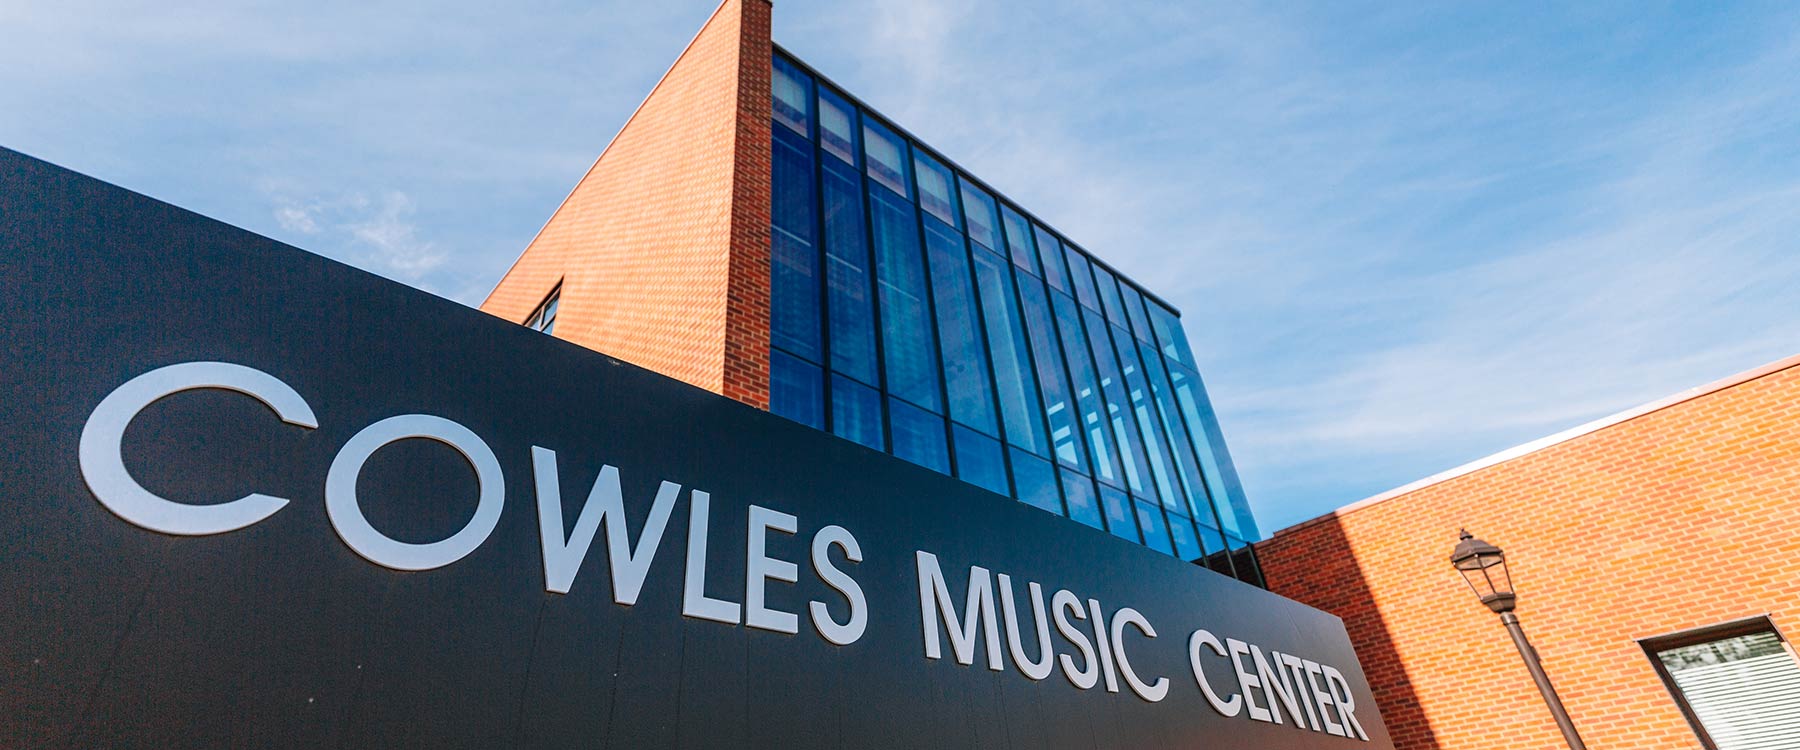 The exterior of Cowles Music Center.